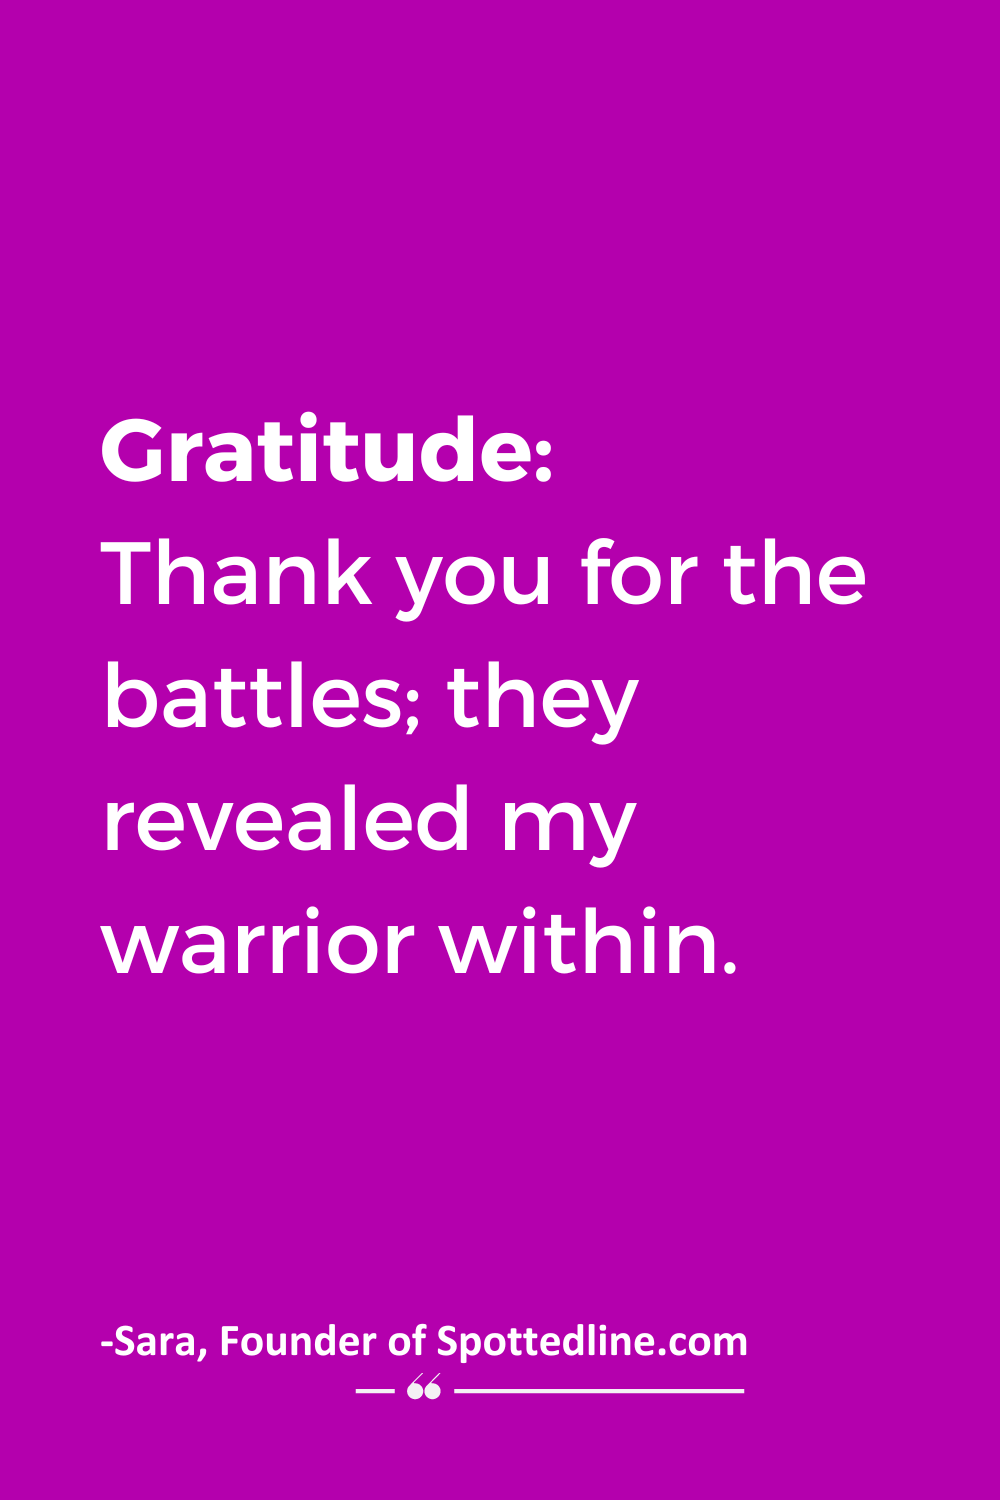 Gratitude Quote that Starts with Thank you.